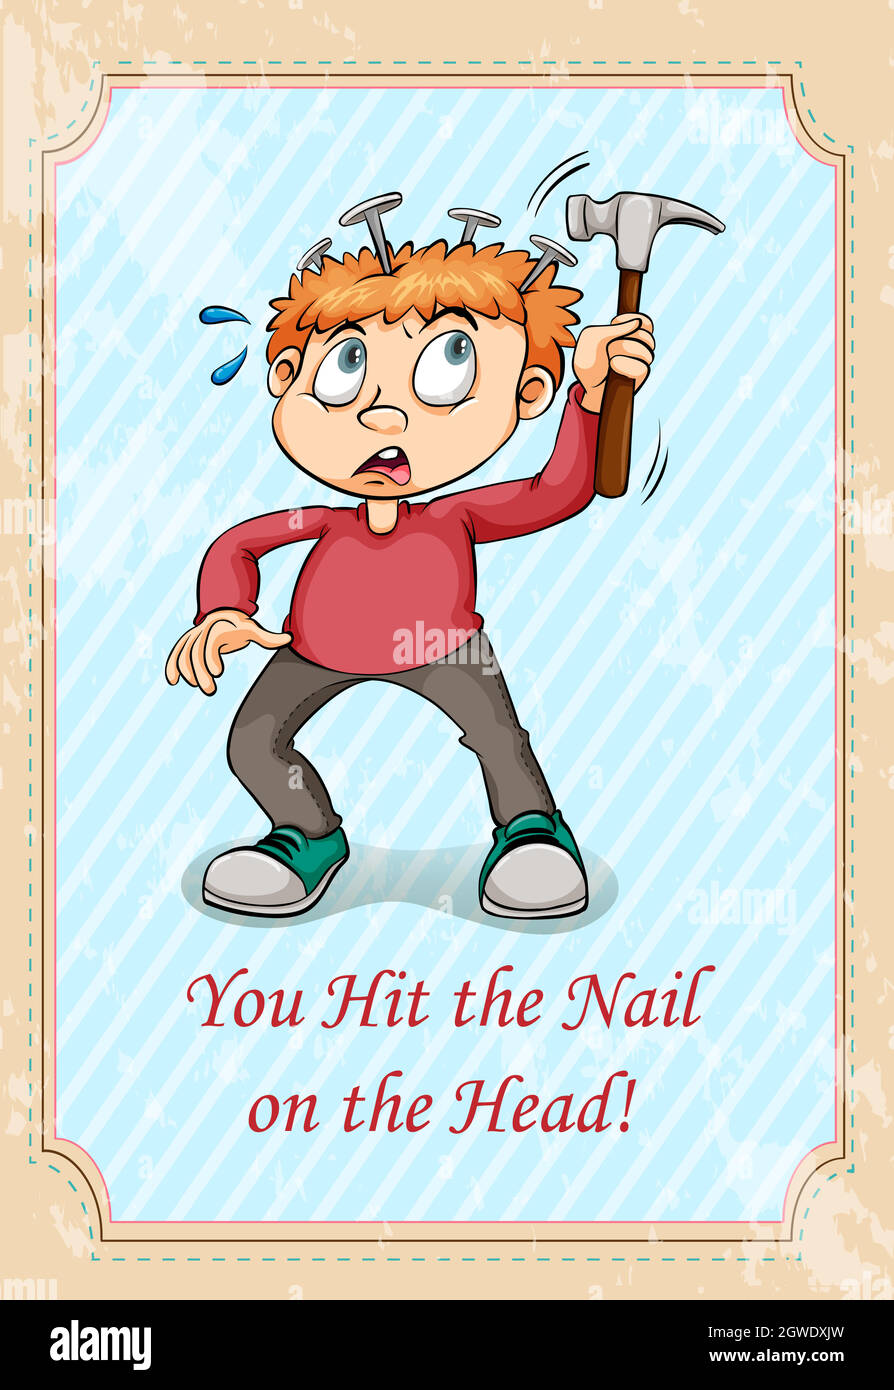 Hit the nail on the head idiom Stock Vector